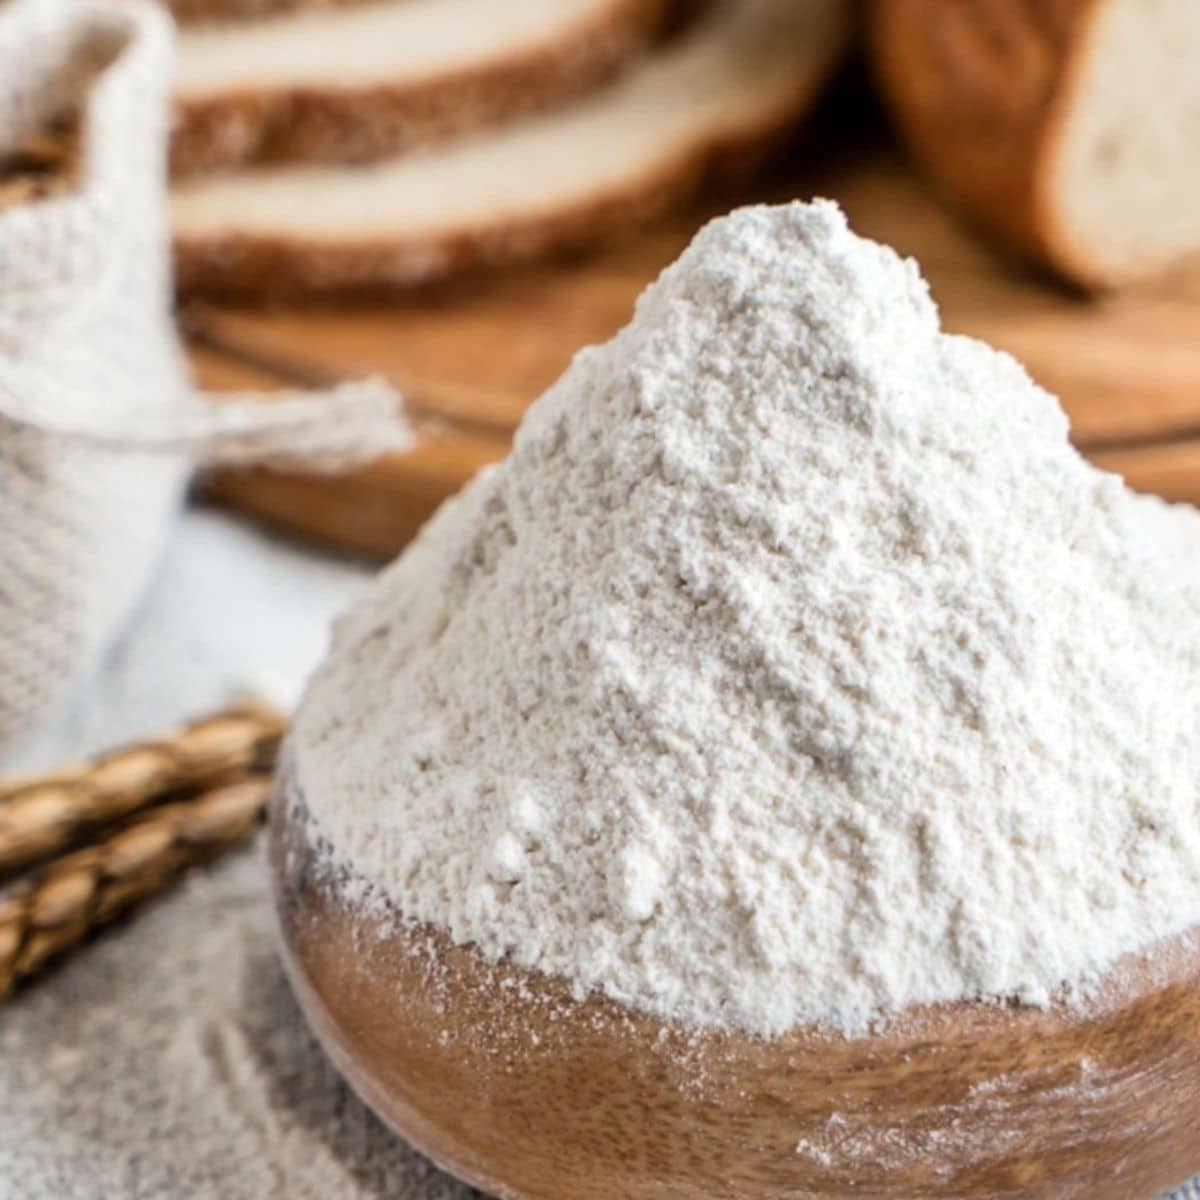 How to make bread flour to use in any recipe.